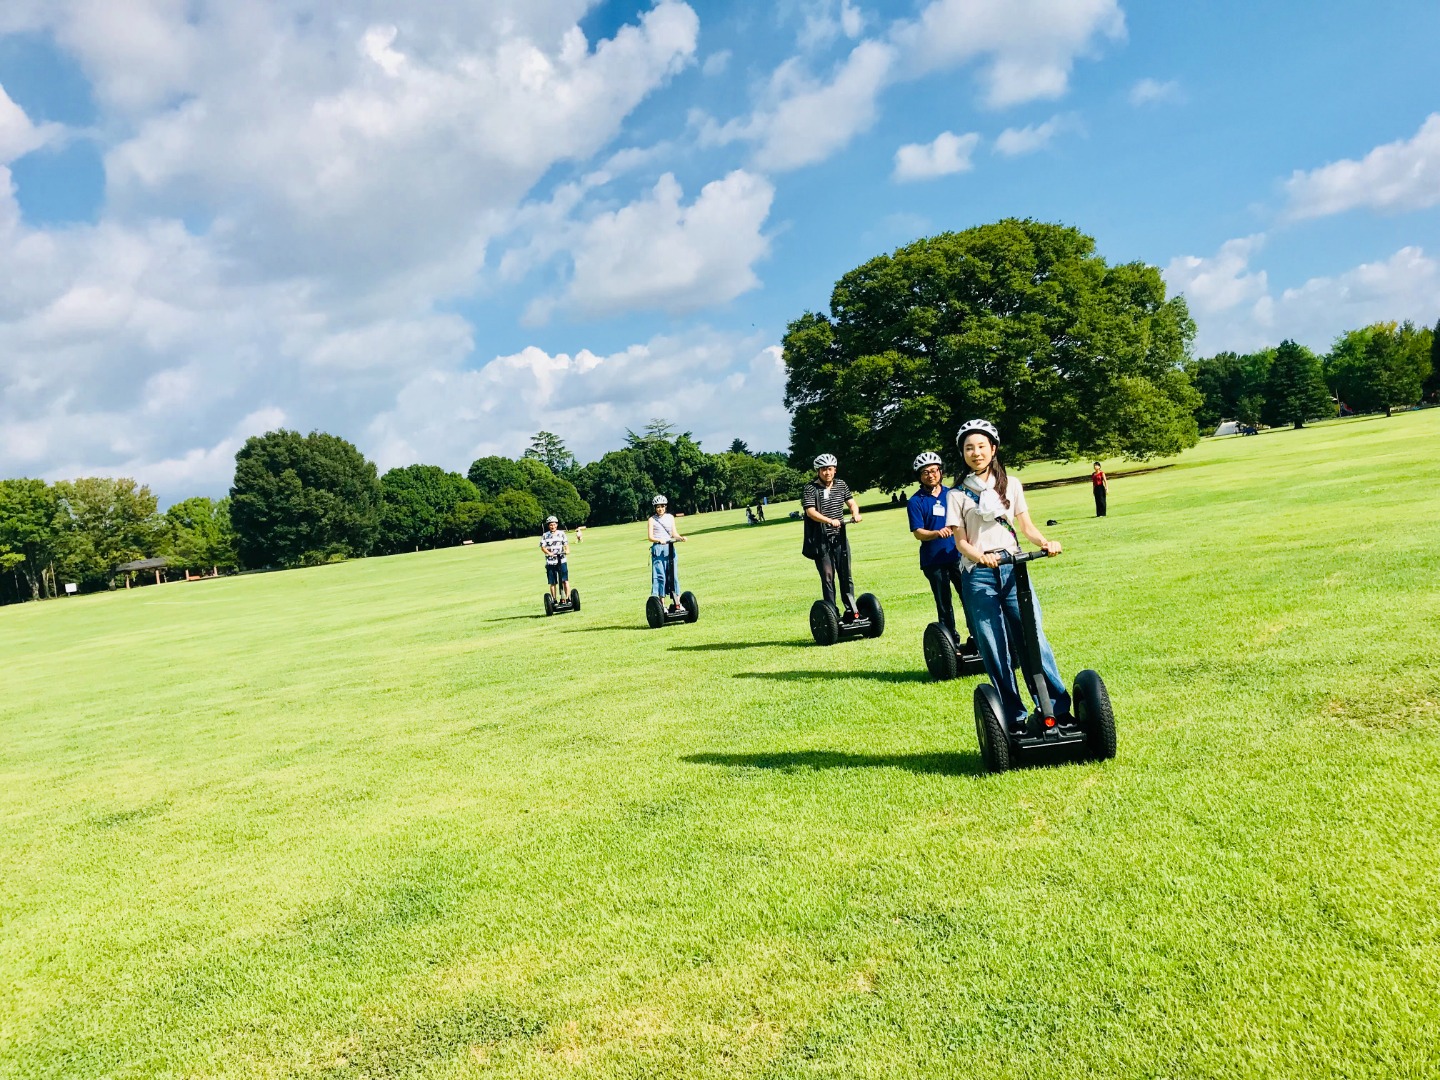 Segway Experience in Showa Kinen Park of Tokyo